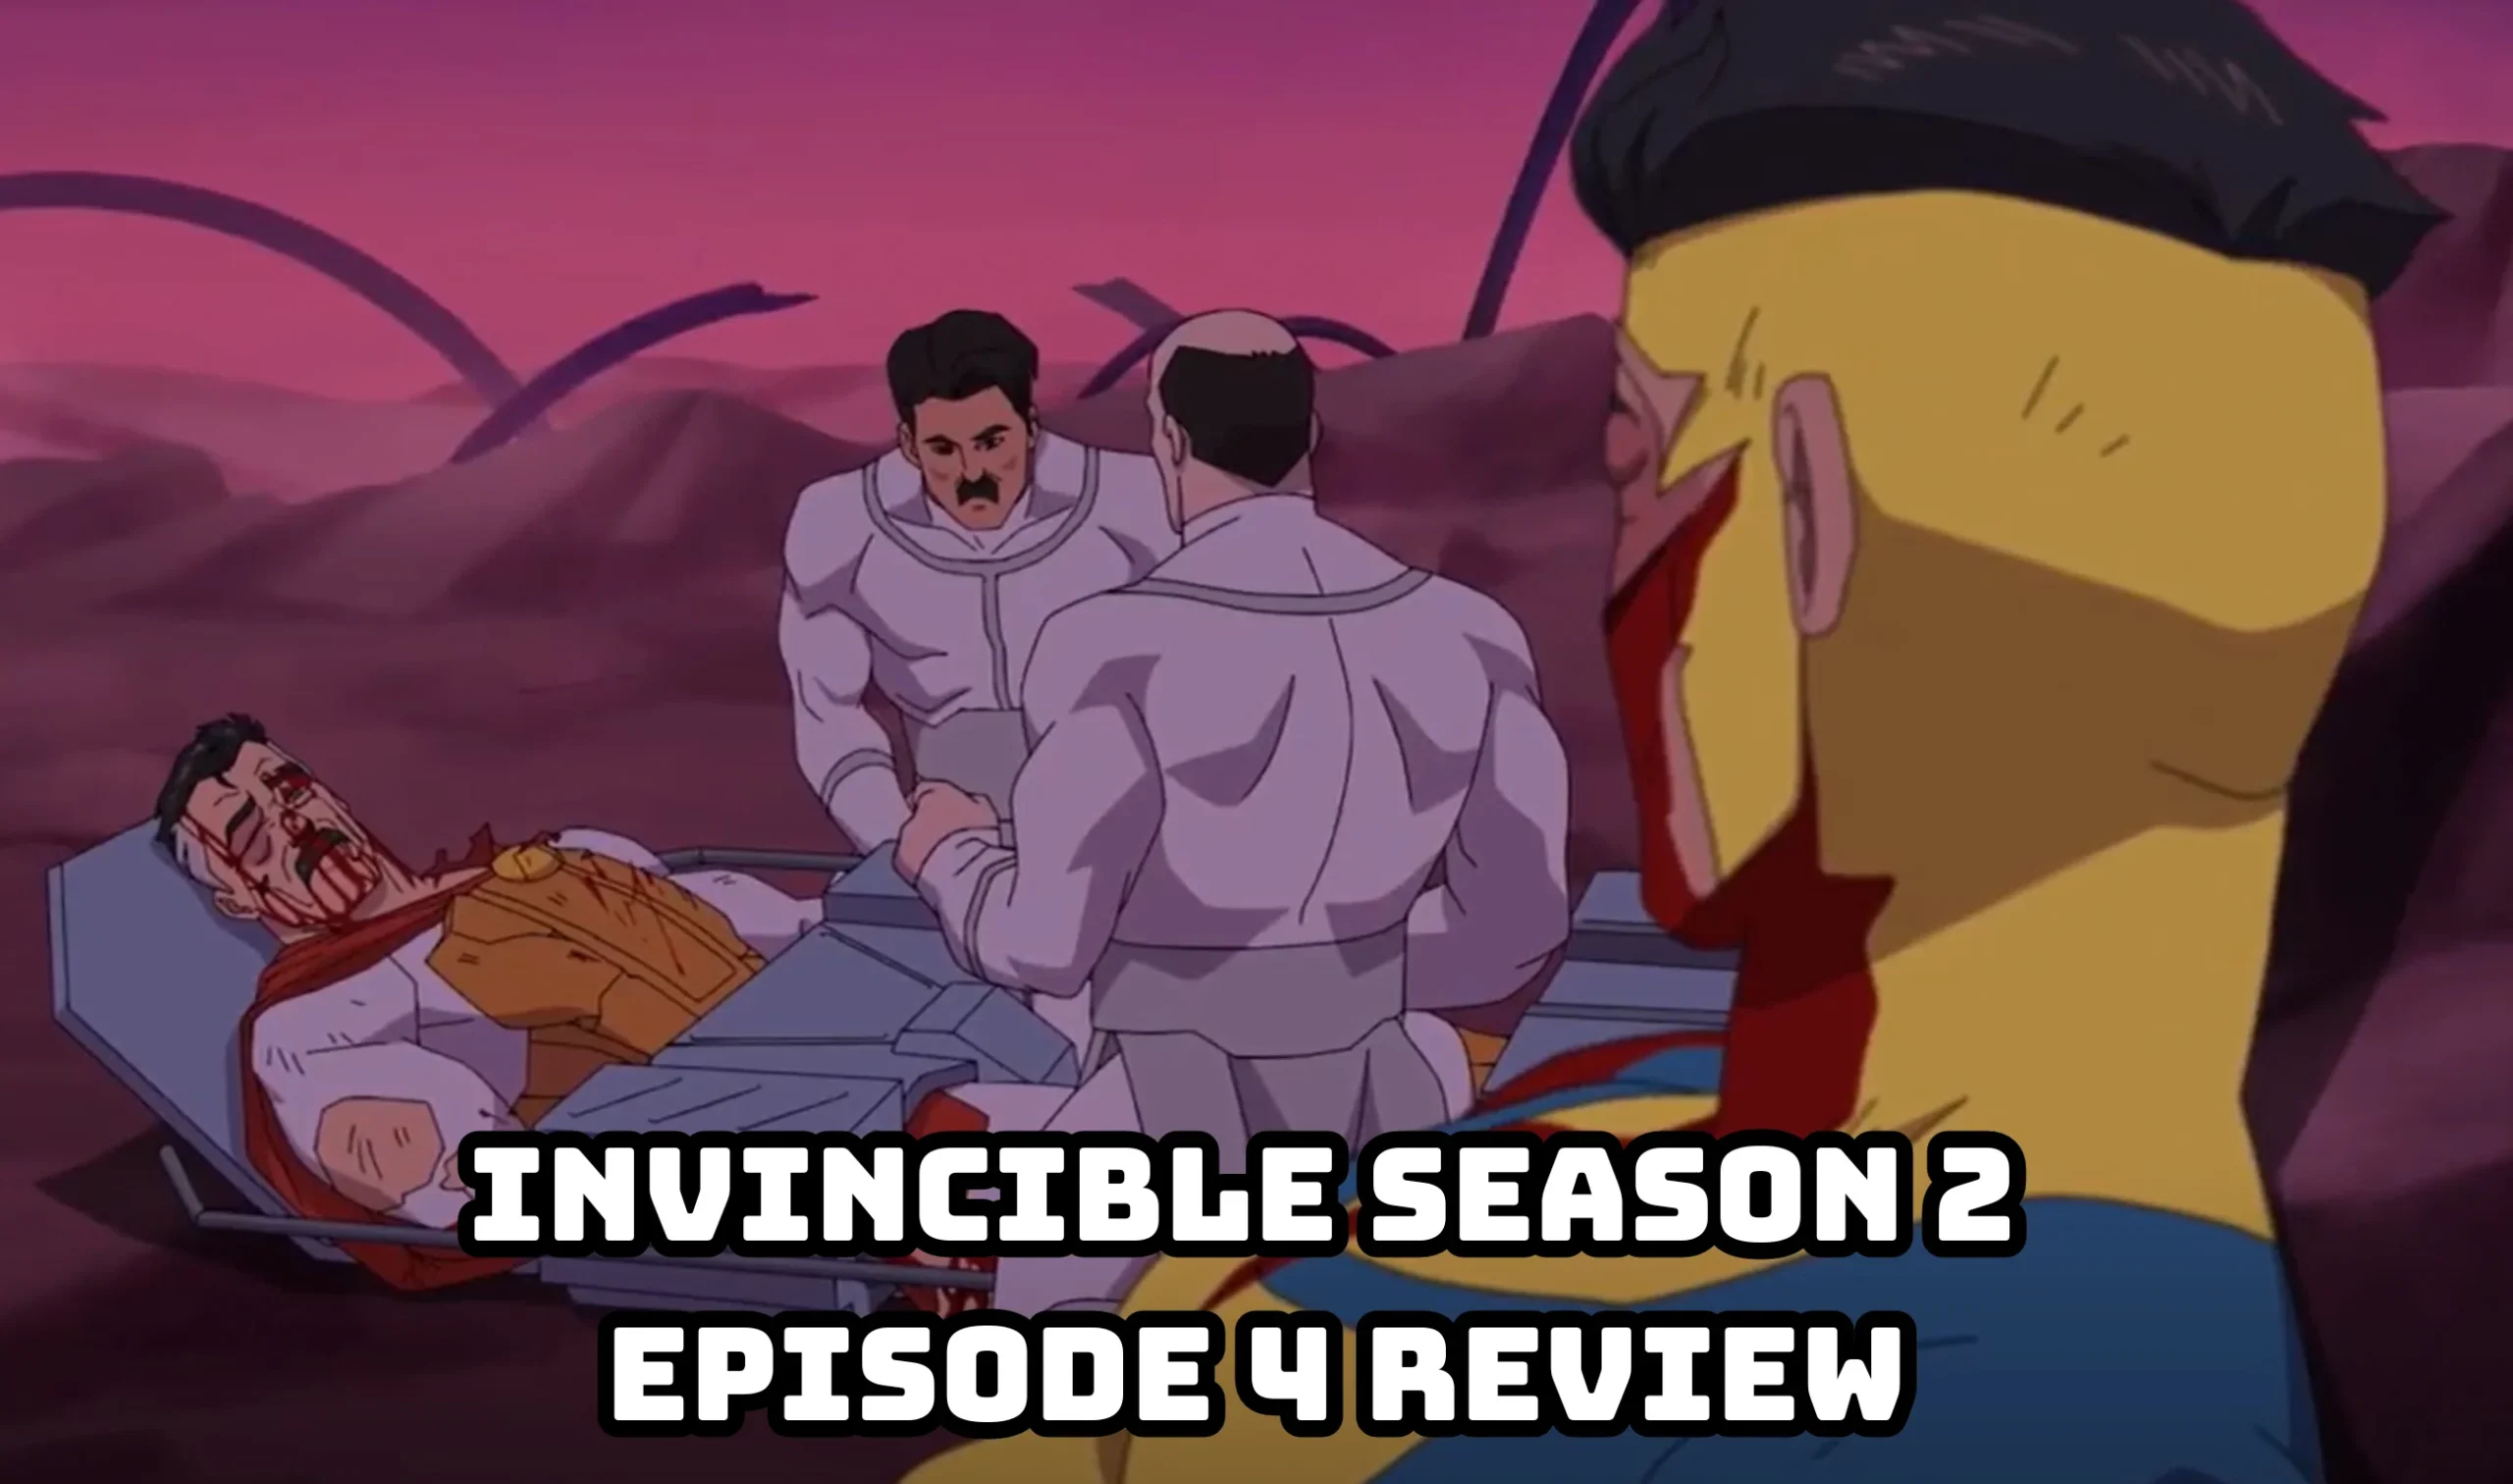 Invincible Season 2 Episode 4 Review: “Back in Action”